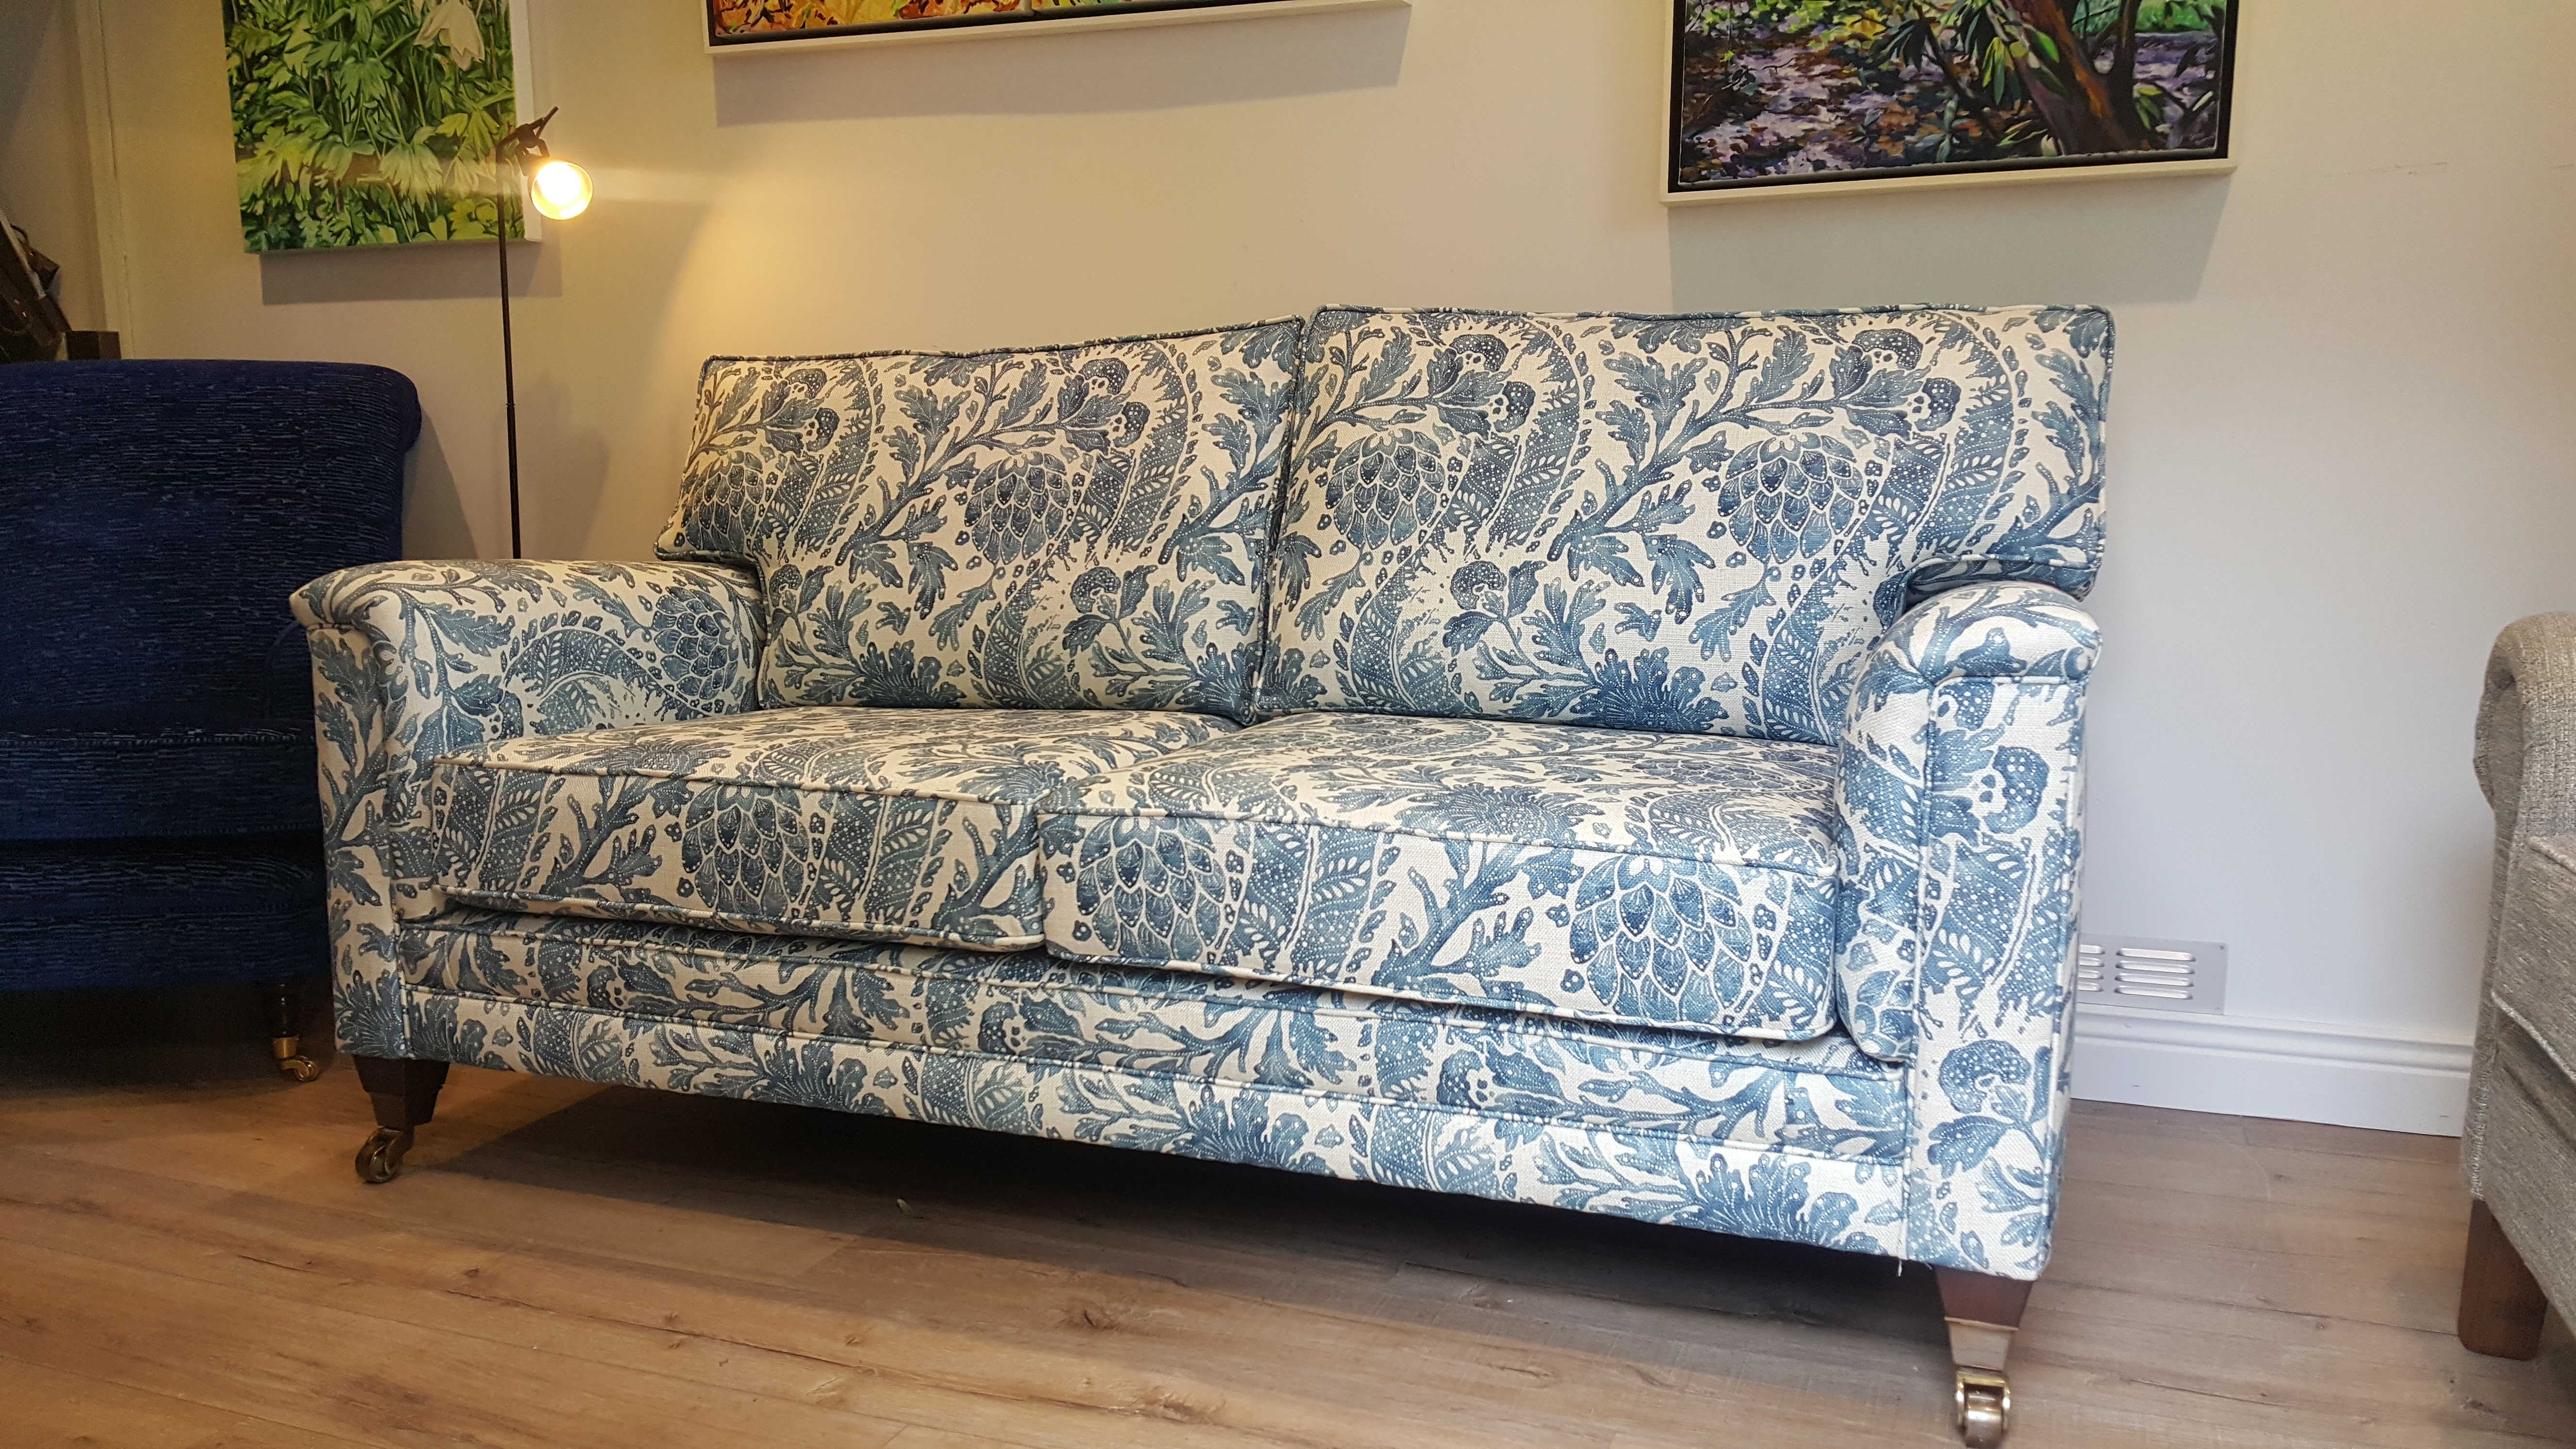 This style is available as a chair, or 2, 3, or 3.5 seater sofa.